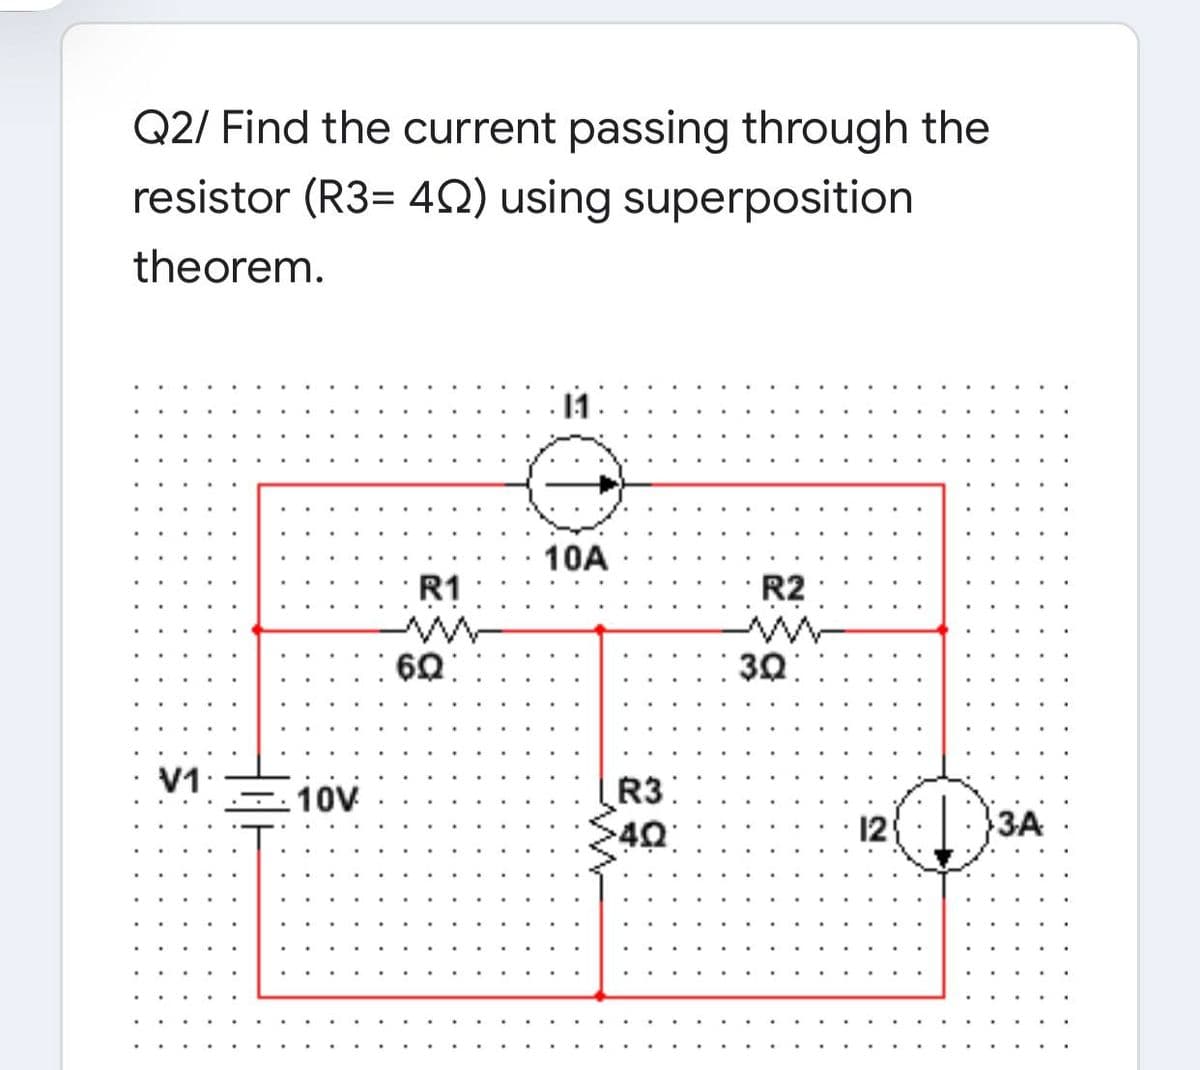 Q2/ Find the current passing through the
resistor (R3= 4Q) using superposition
theorem.
11
10A
R1
R2
ww
60:
30
V1.
10V
R31
12
ЗА
